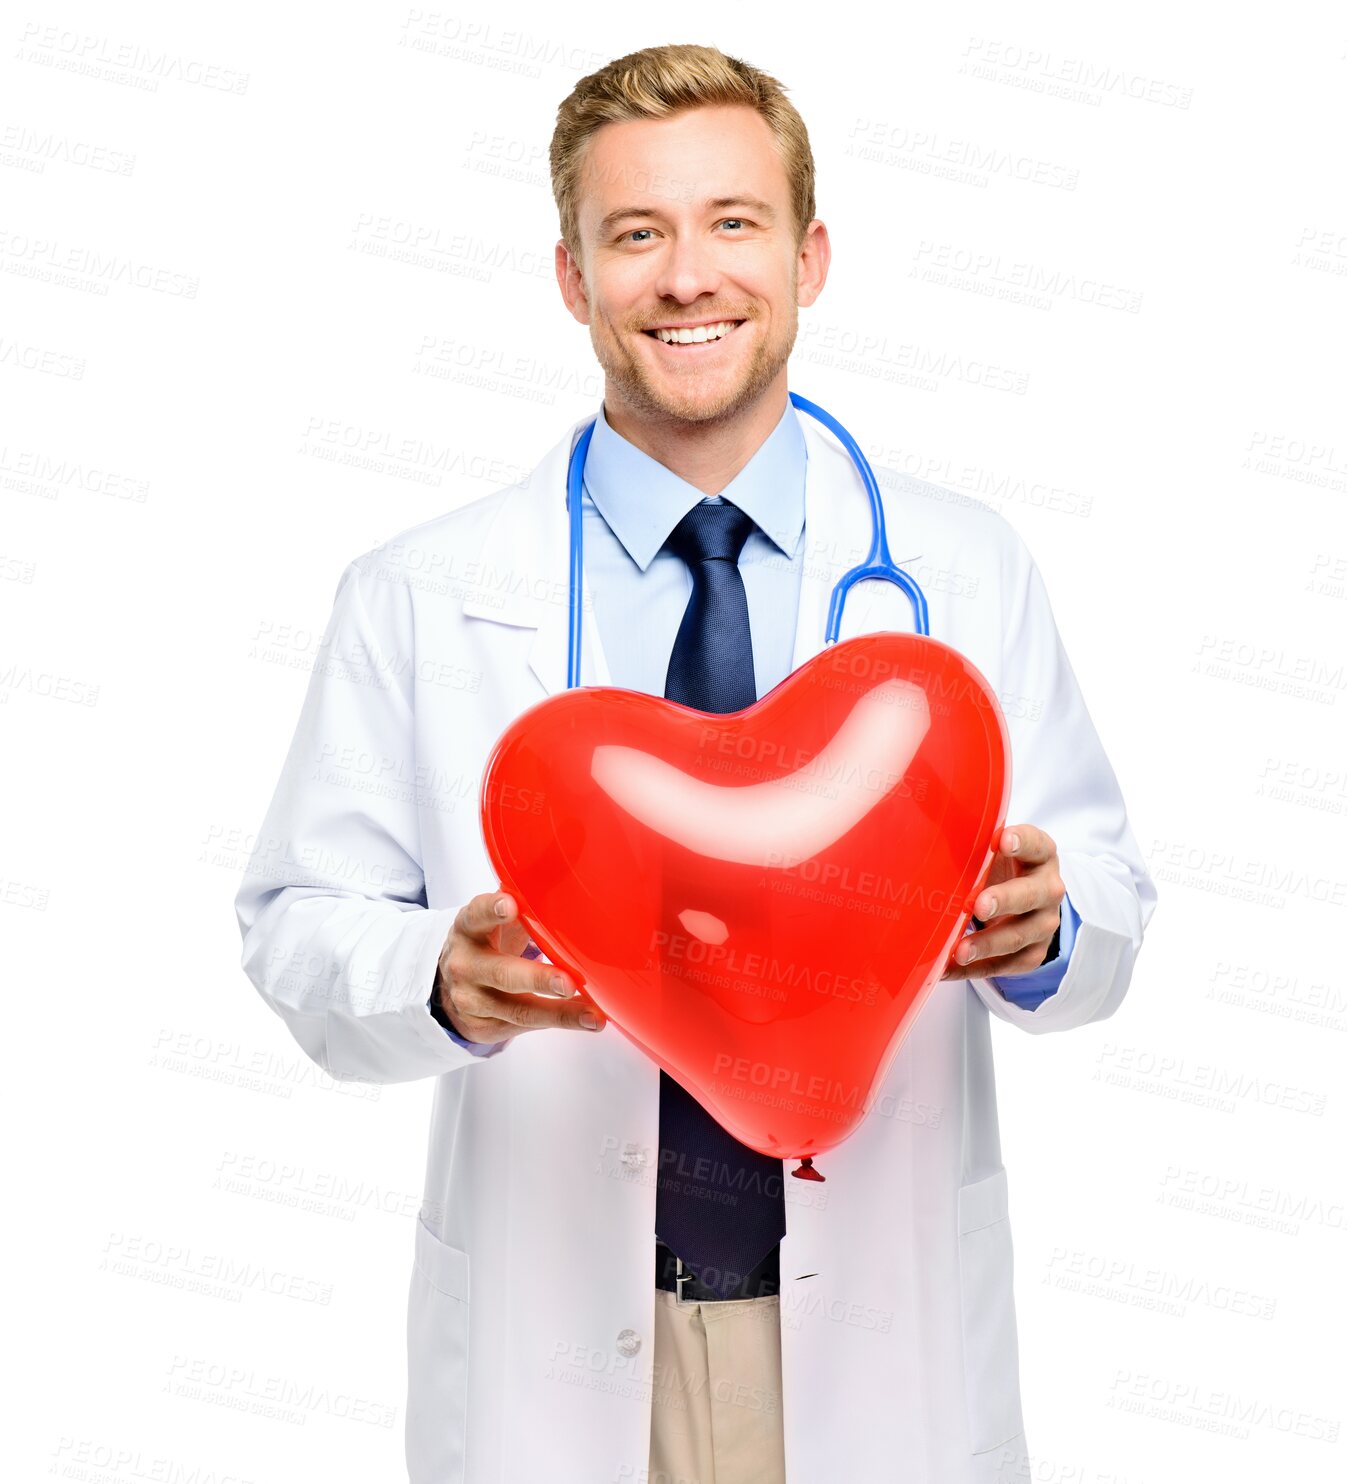 Buy stock photo Happy man, doctor and heart shape for healthcare cardiology isolated on a transparent PNG background. Portrait of male person or medical professional smile with loving symbol, sign or emoji for love